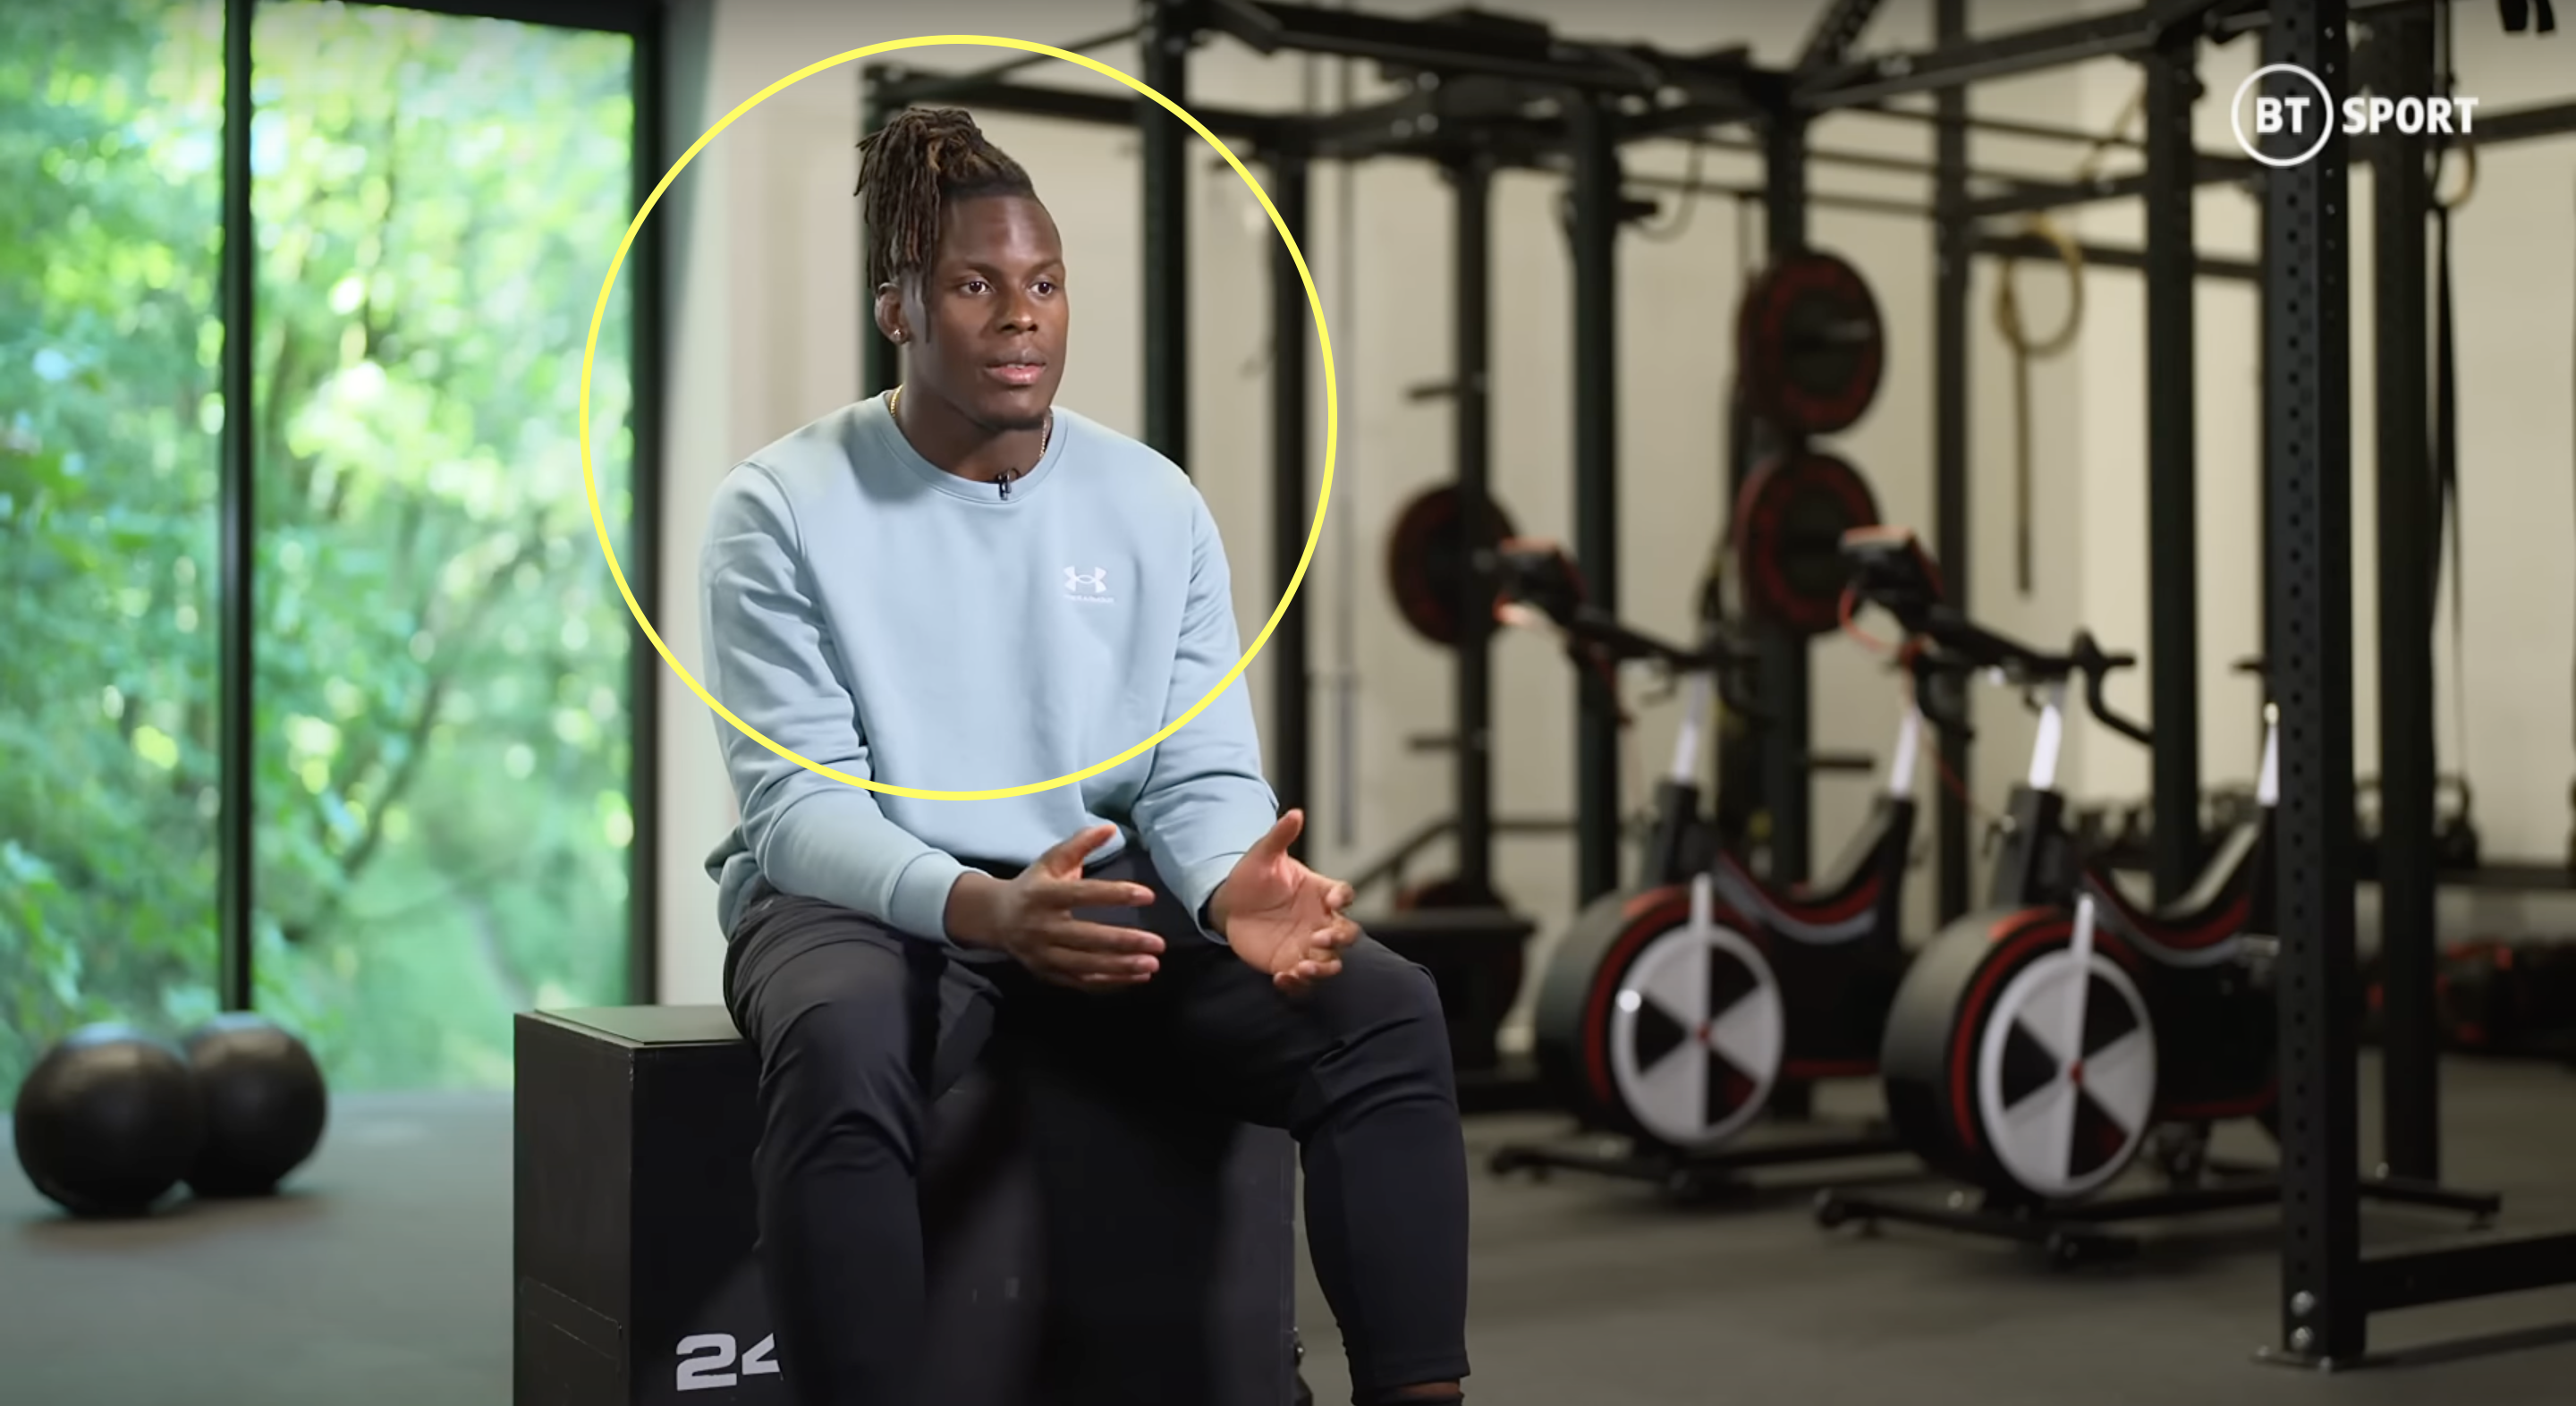 Maro Itoje has big plans ahead of World Cup next year